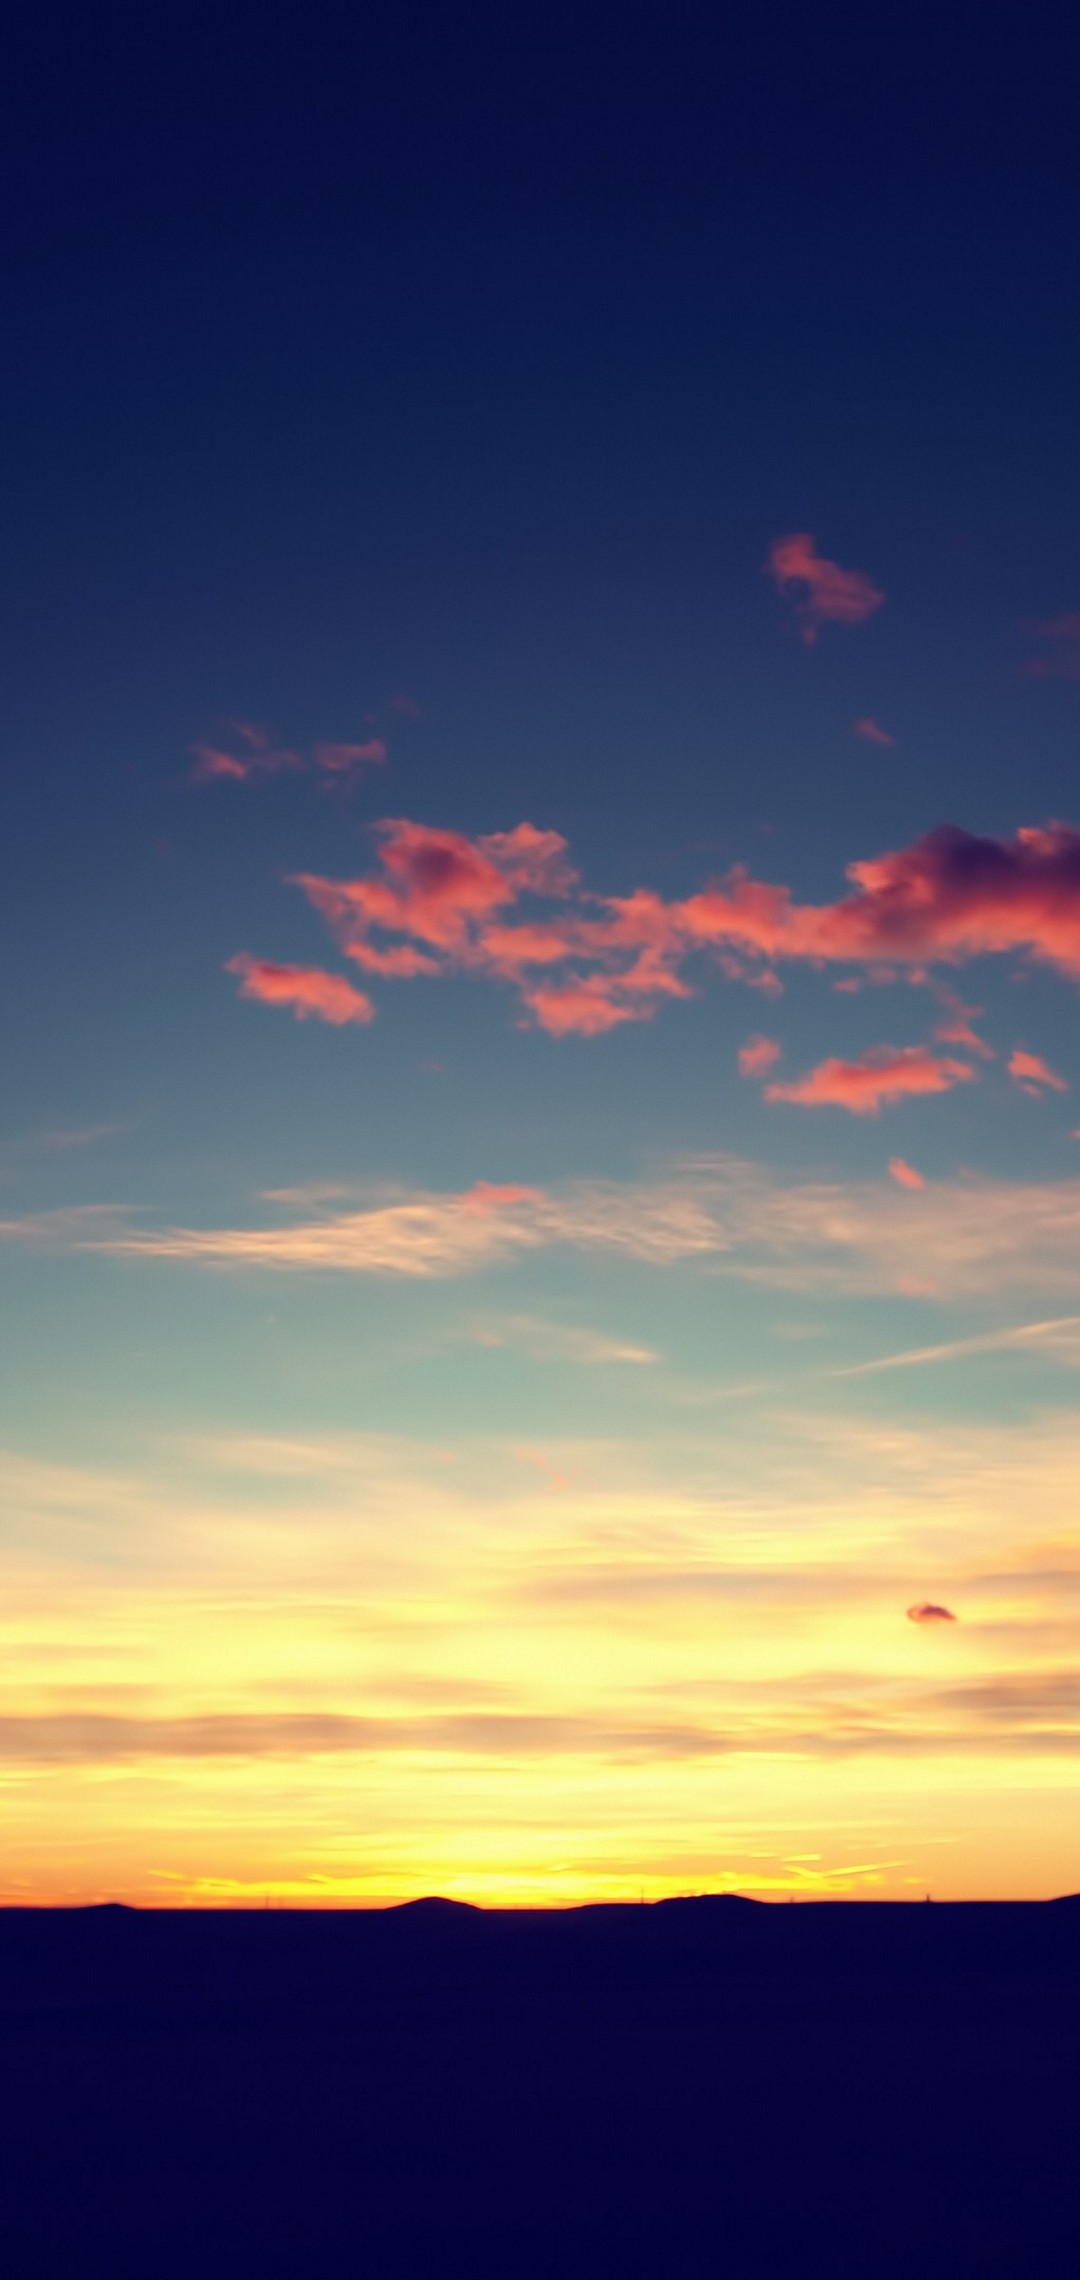 100 Stunning Sunset Sky Pictures HD  Download Free Images  Stock  Photos on Unsplash